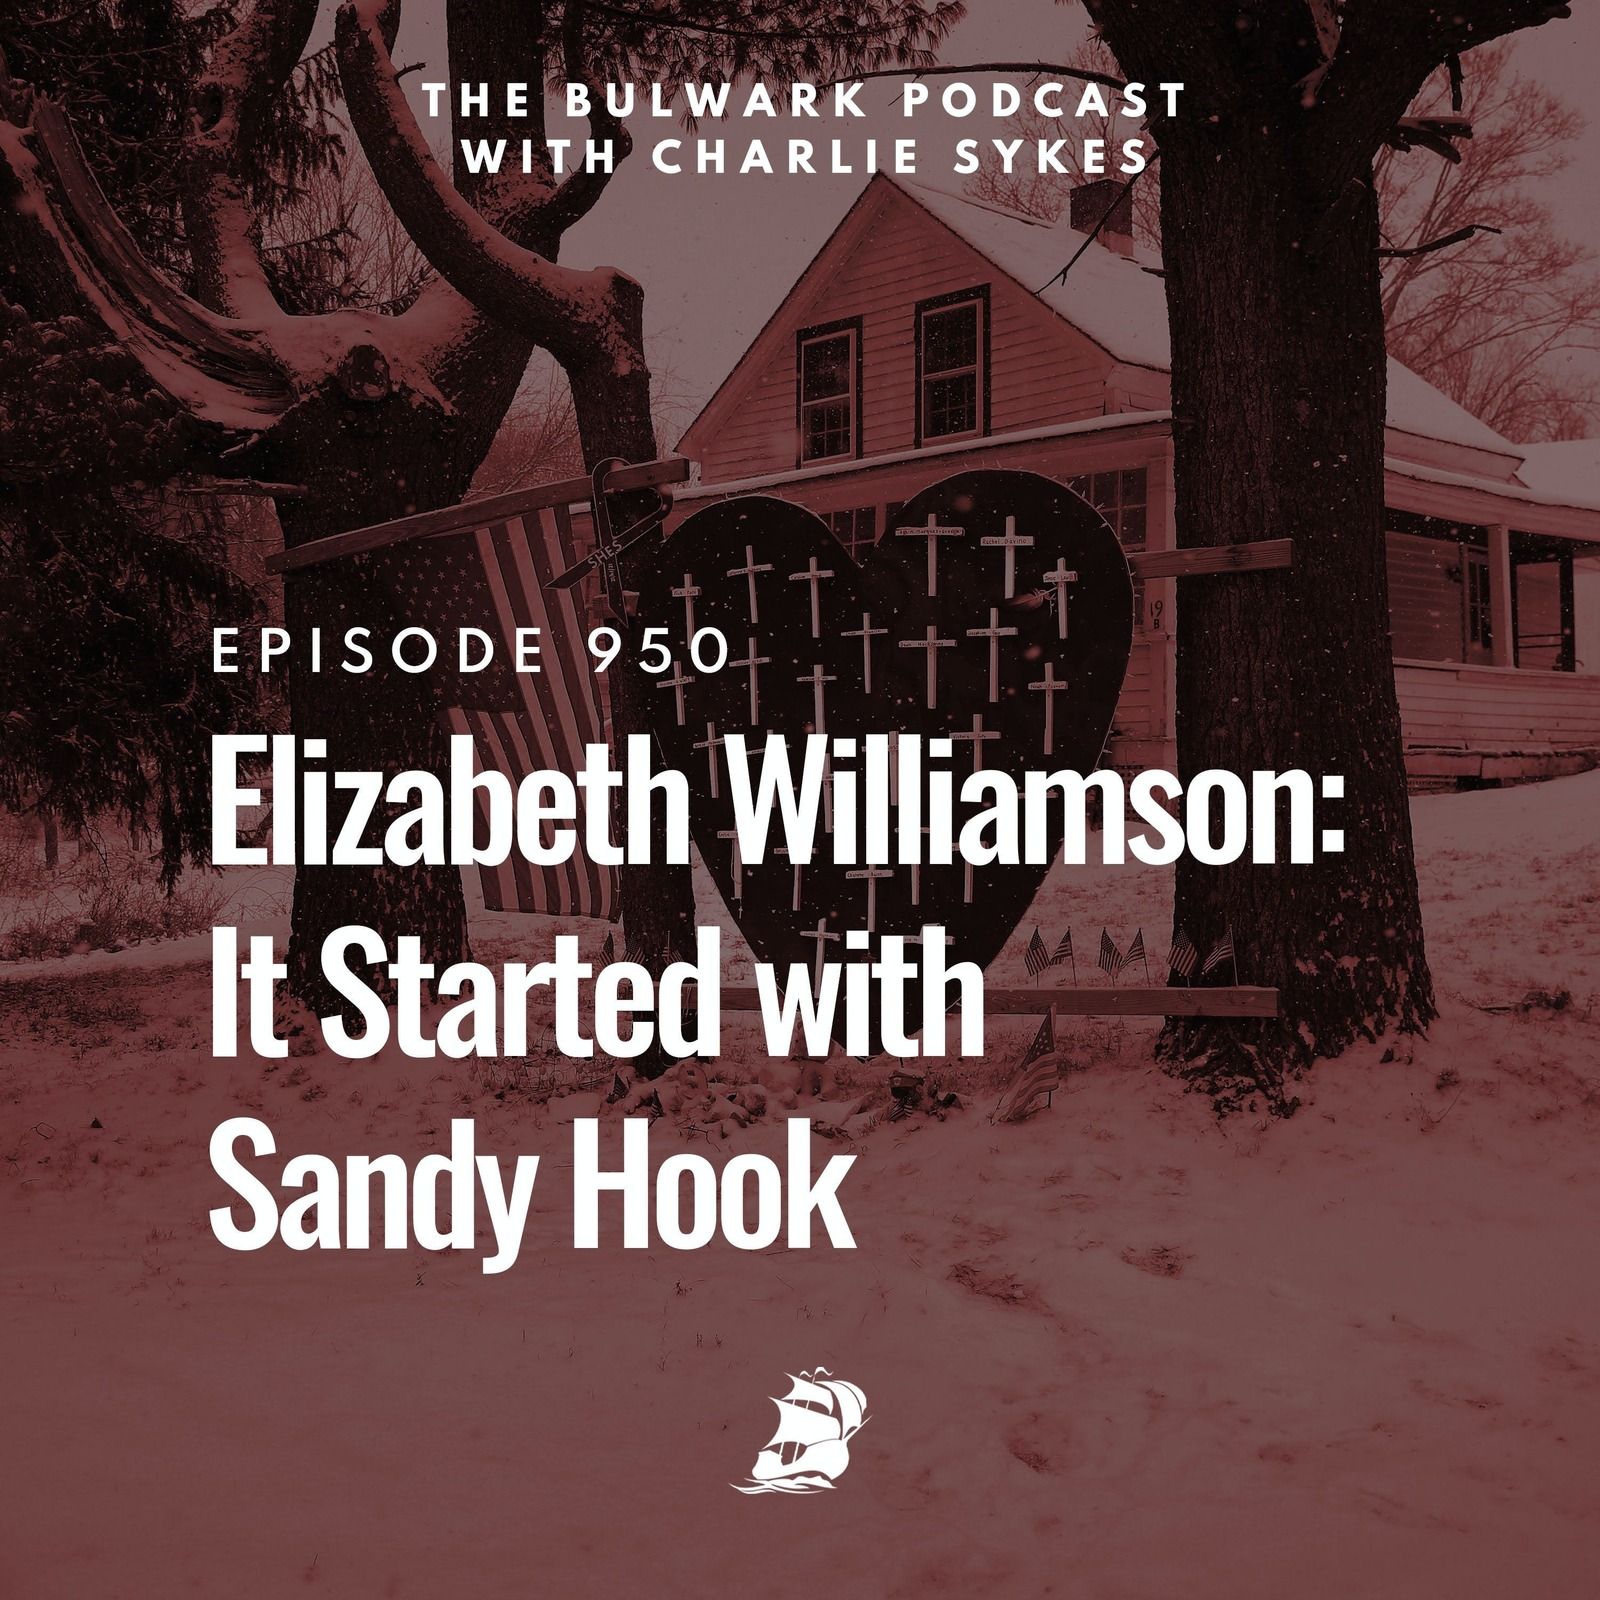 Elizabeth Williamson: It Started with Sandy Hook by The Bulwark Podcast